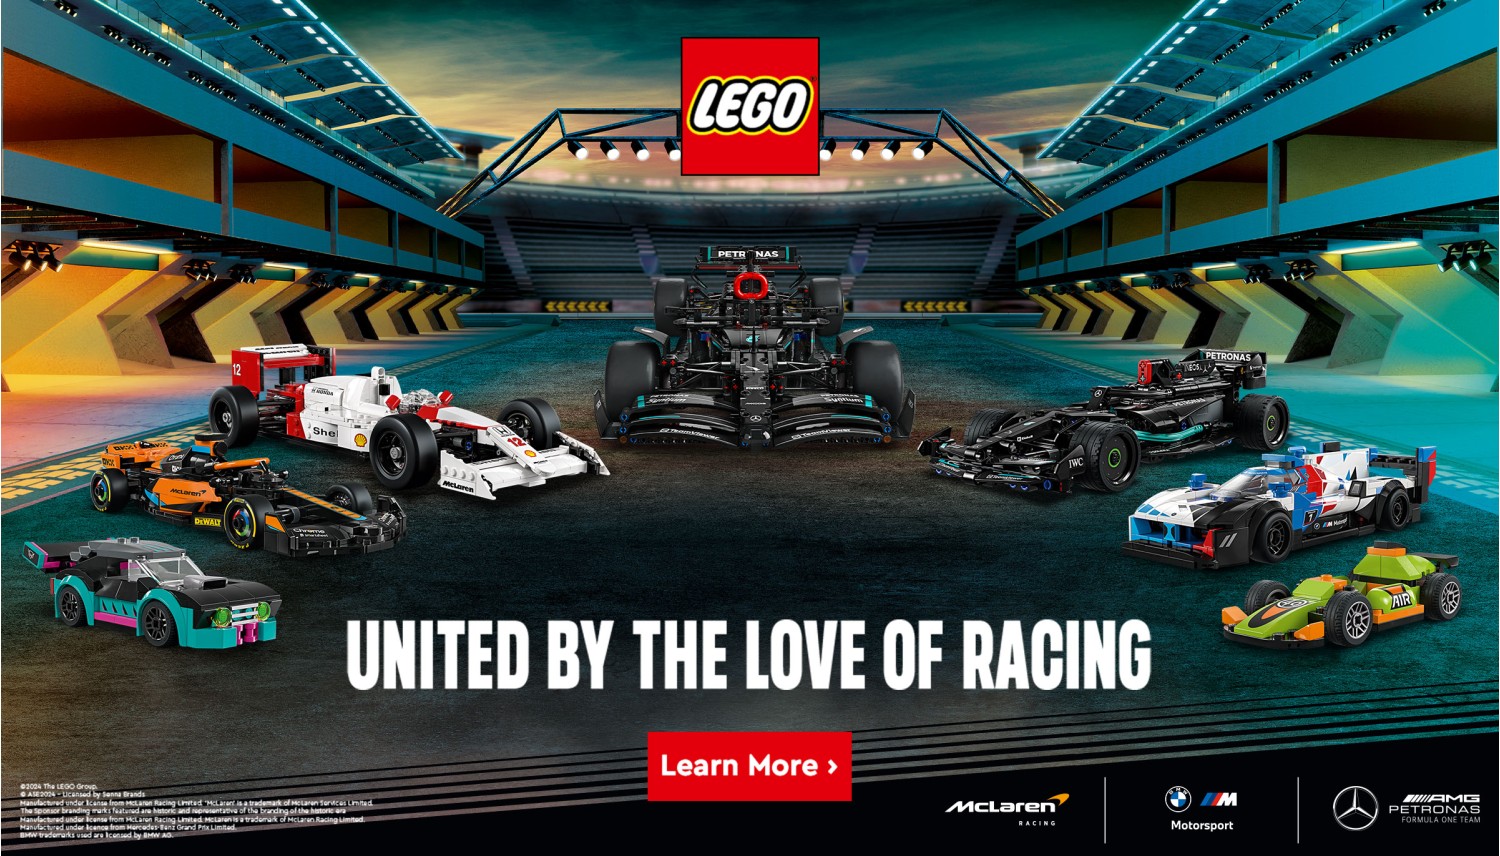 United by the love of racing